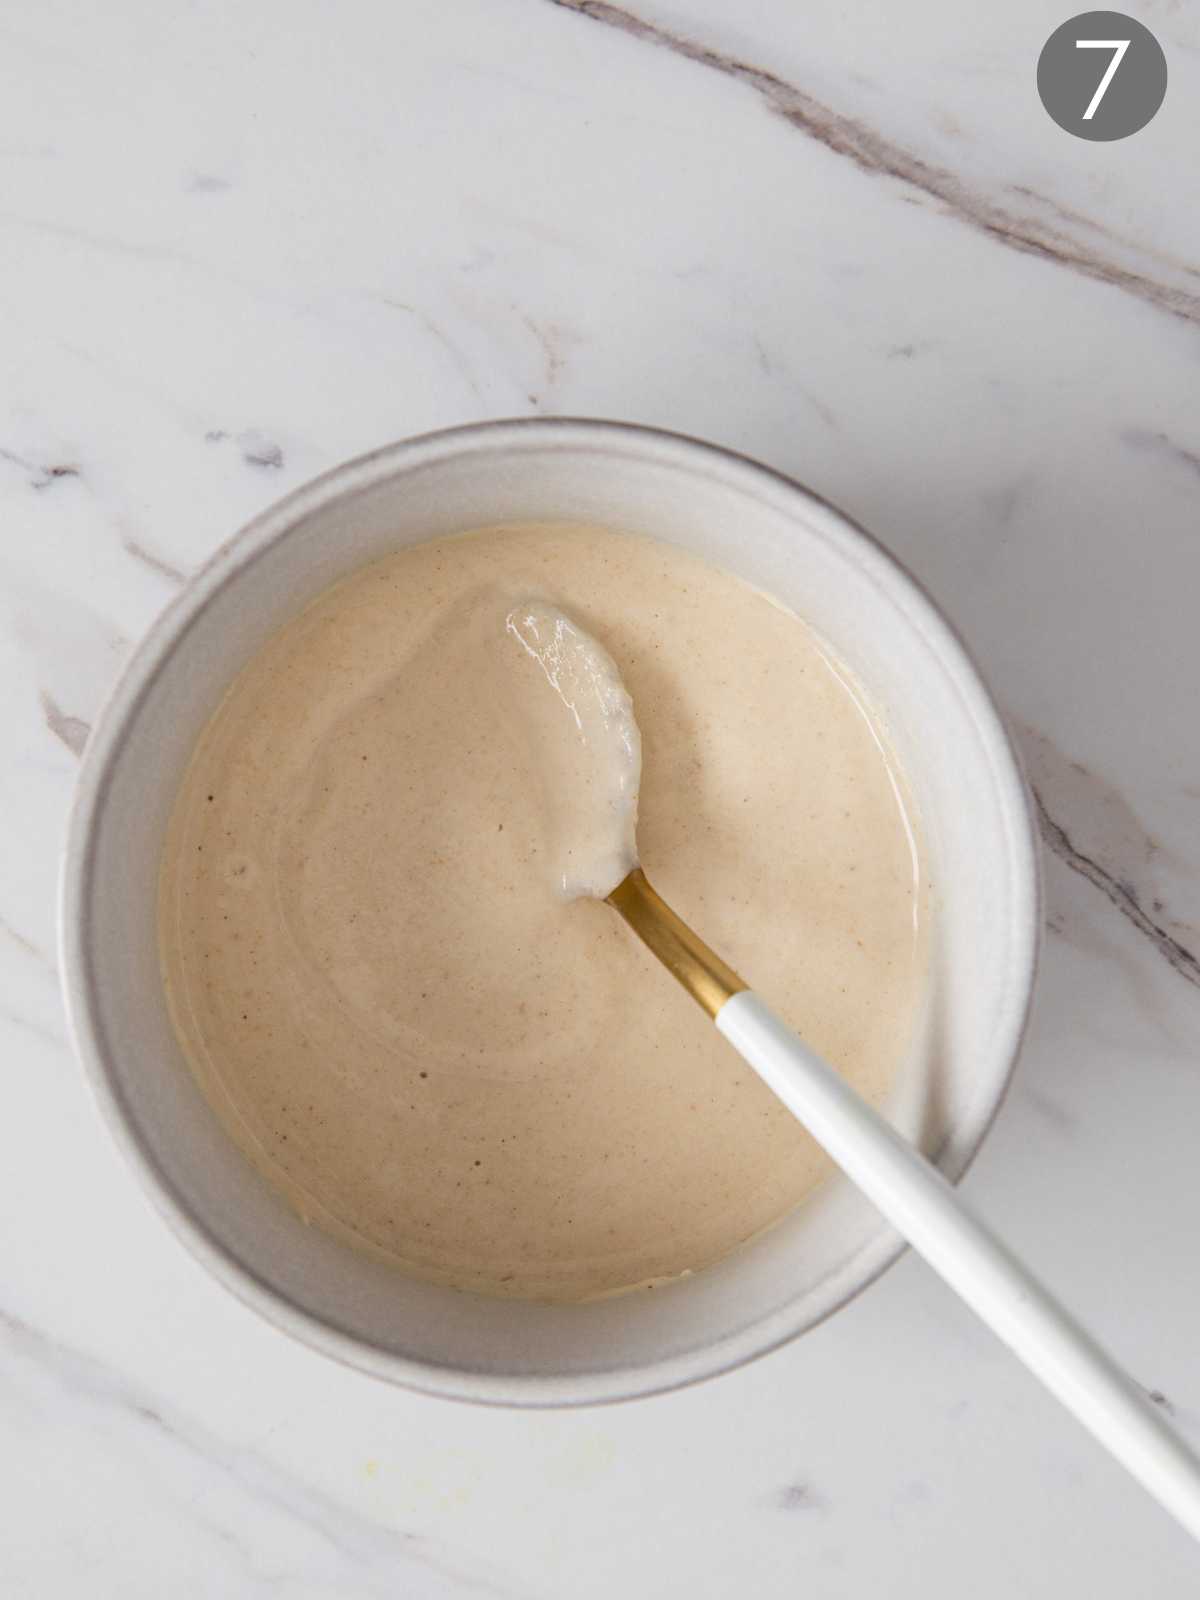 Tahini sauce in serving bowl with a metal serving spoon.